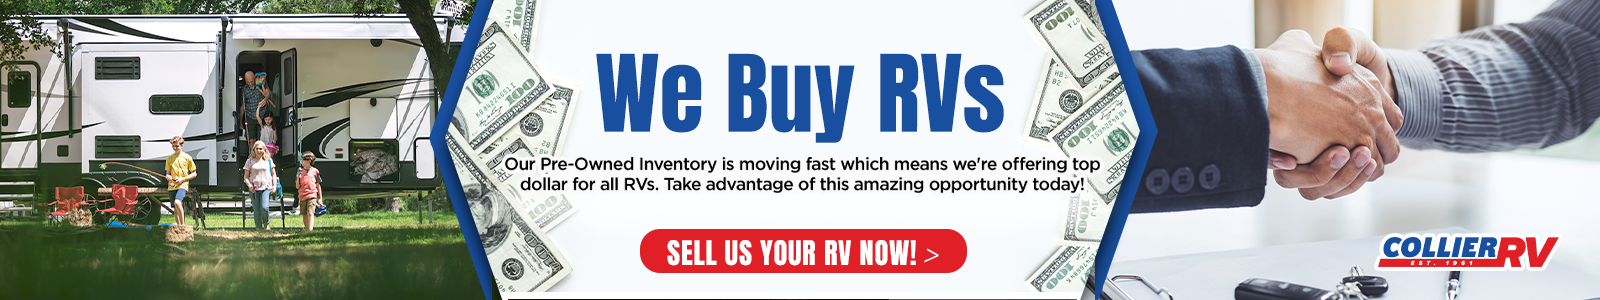 Sell Collier RV your RV